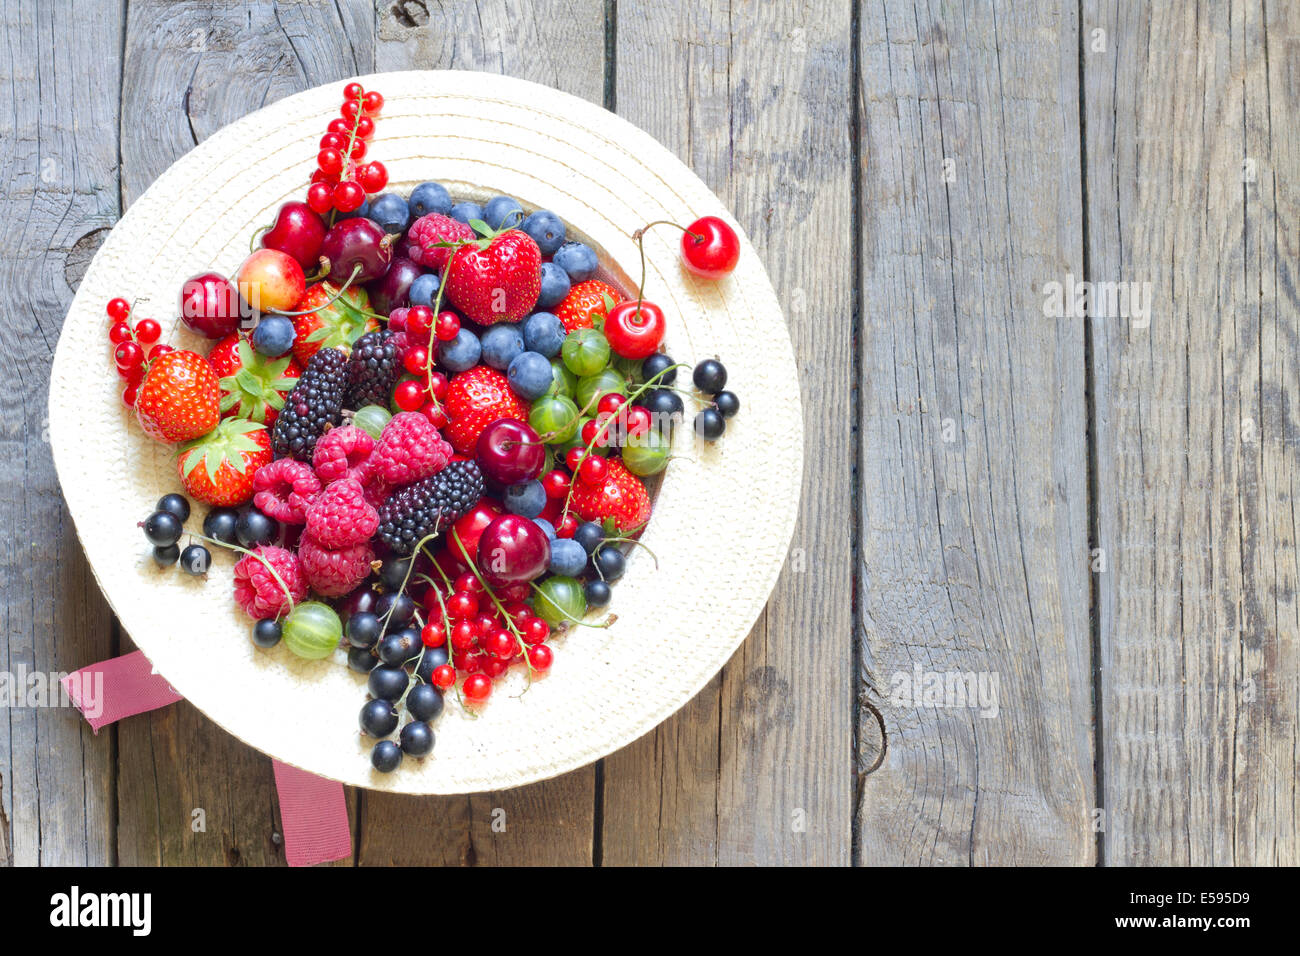 Summer wild berry fruits on vintage board still life concept Stock Photo